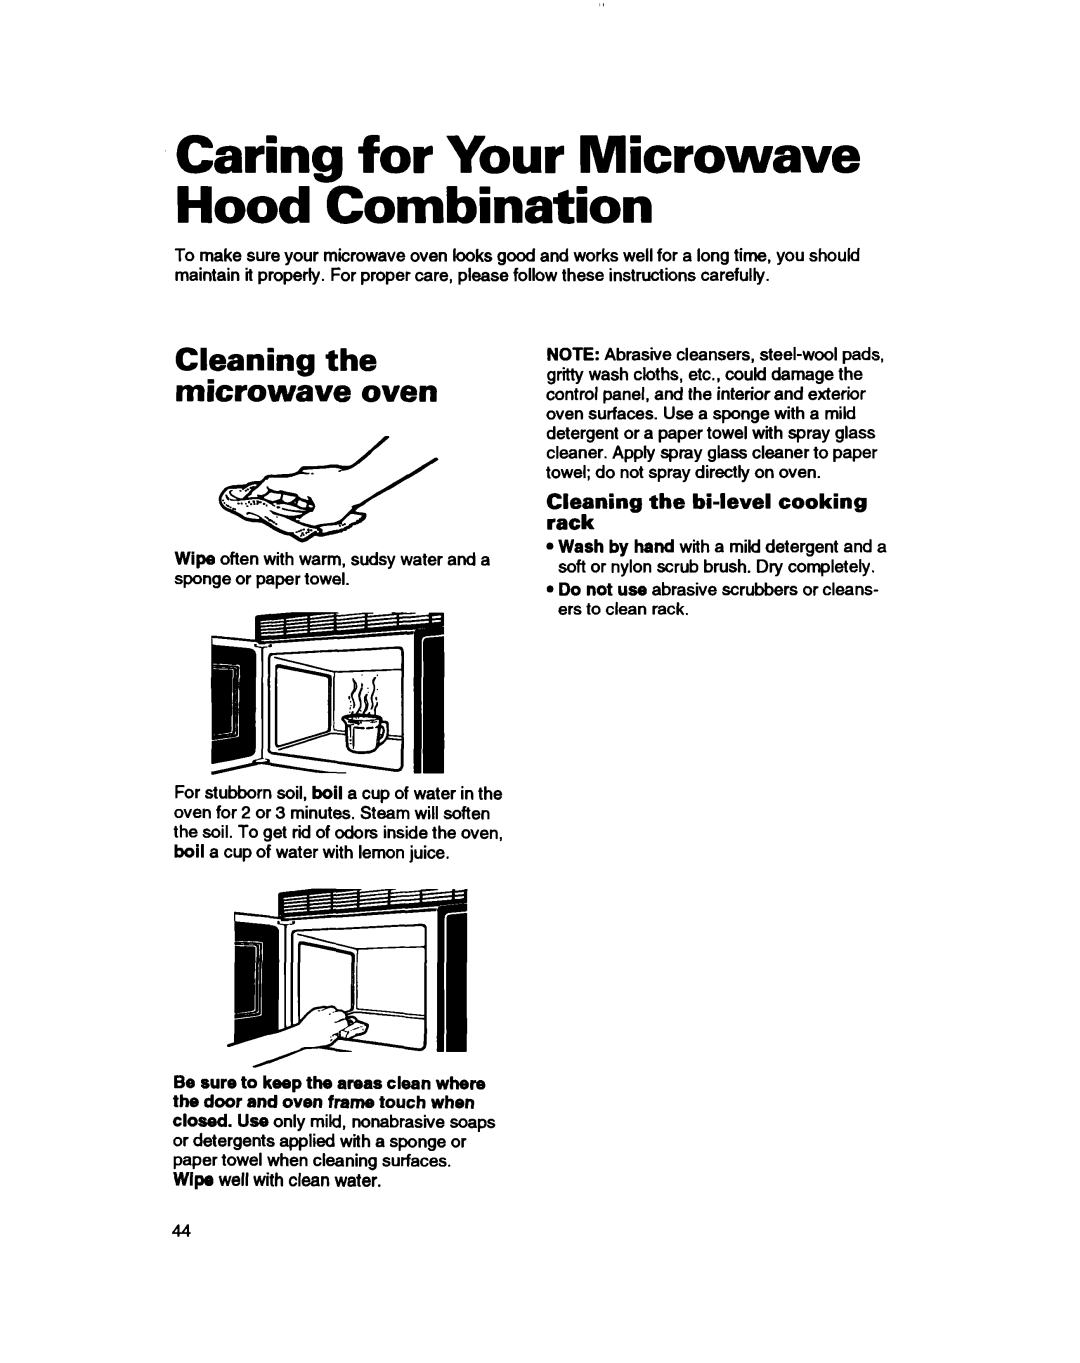 Whirlpool MH7115XB Caring for Your Microwave Hood Combination, Cleaning the microwave oven, CEJE ning the bi-levelcooking 